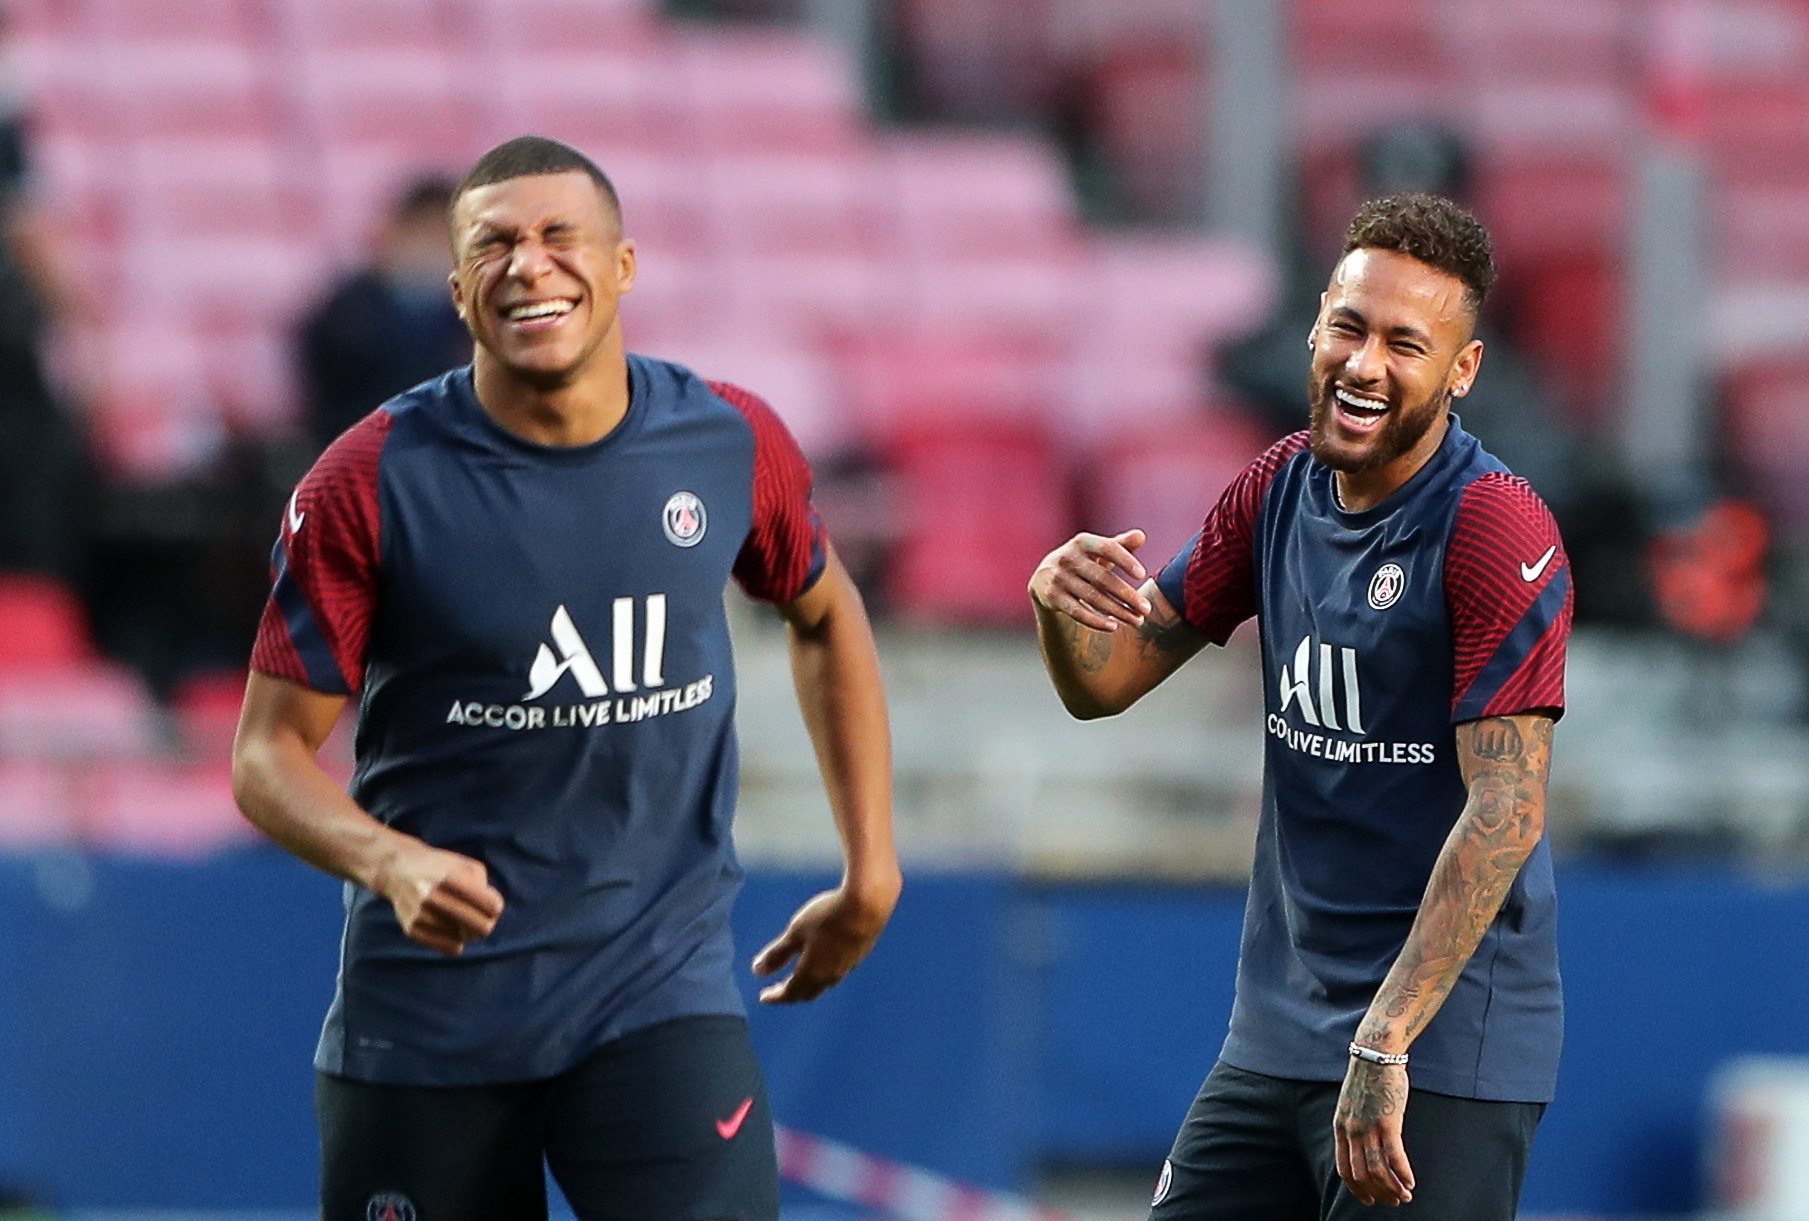 Lisbon (Portugal), 22/08/2020.- PSG players Kylian lt;HIT gt;Mbappe lt;/HIT gt; (L) and Neymar (R) attend their teams training session in Lisbon, Portugal, 22 August 2020. Paris Saint-Germain will face Bayern Munich in the UEFA Champions League final on 23 August 2020. (Liga de Campeones, Lisboa) EFE/EPA/Miguel A. Lopes / POOL